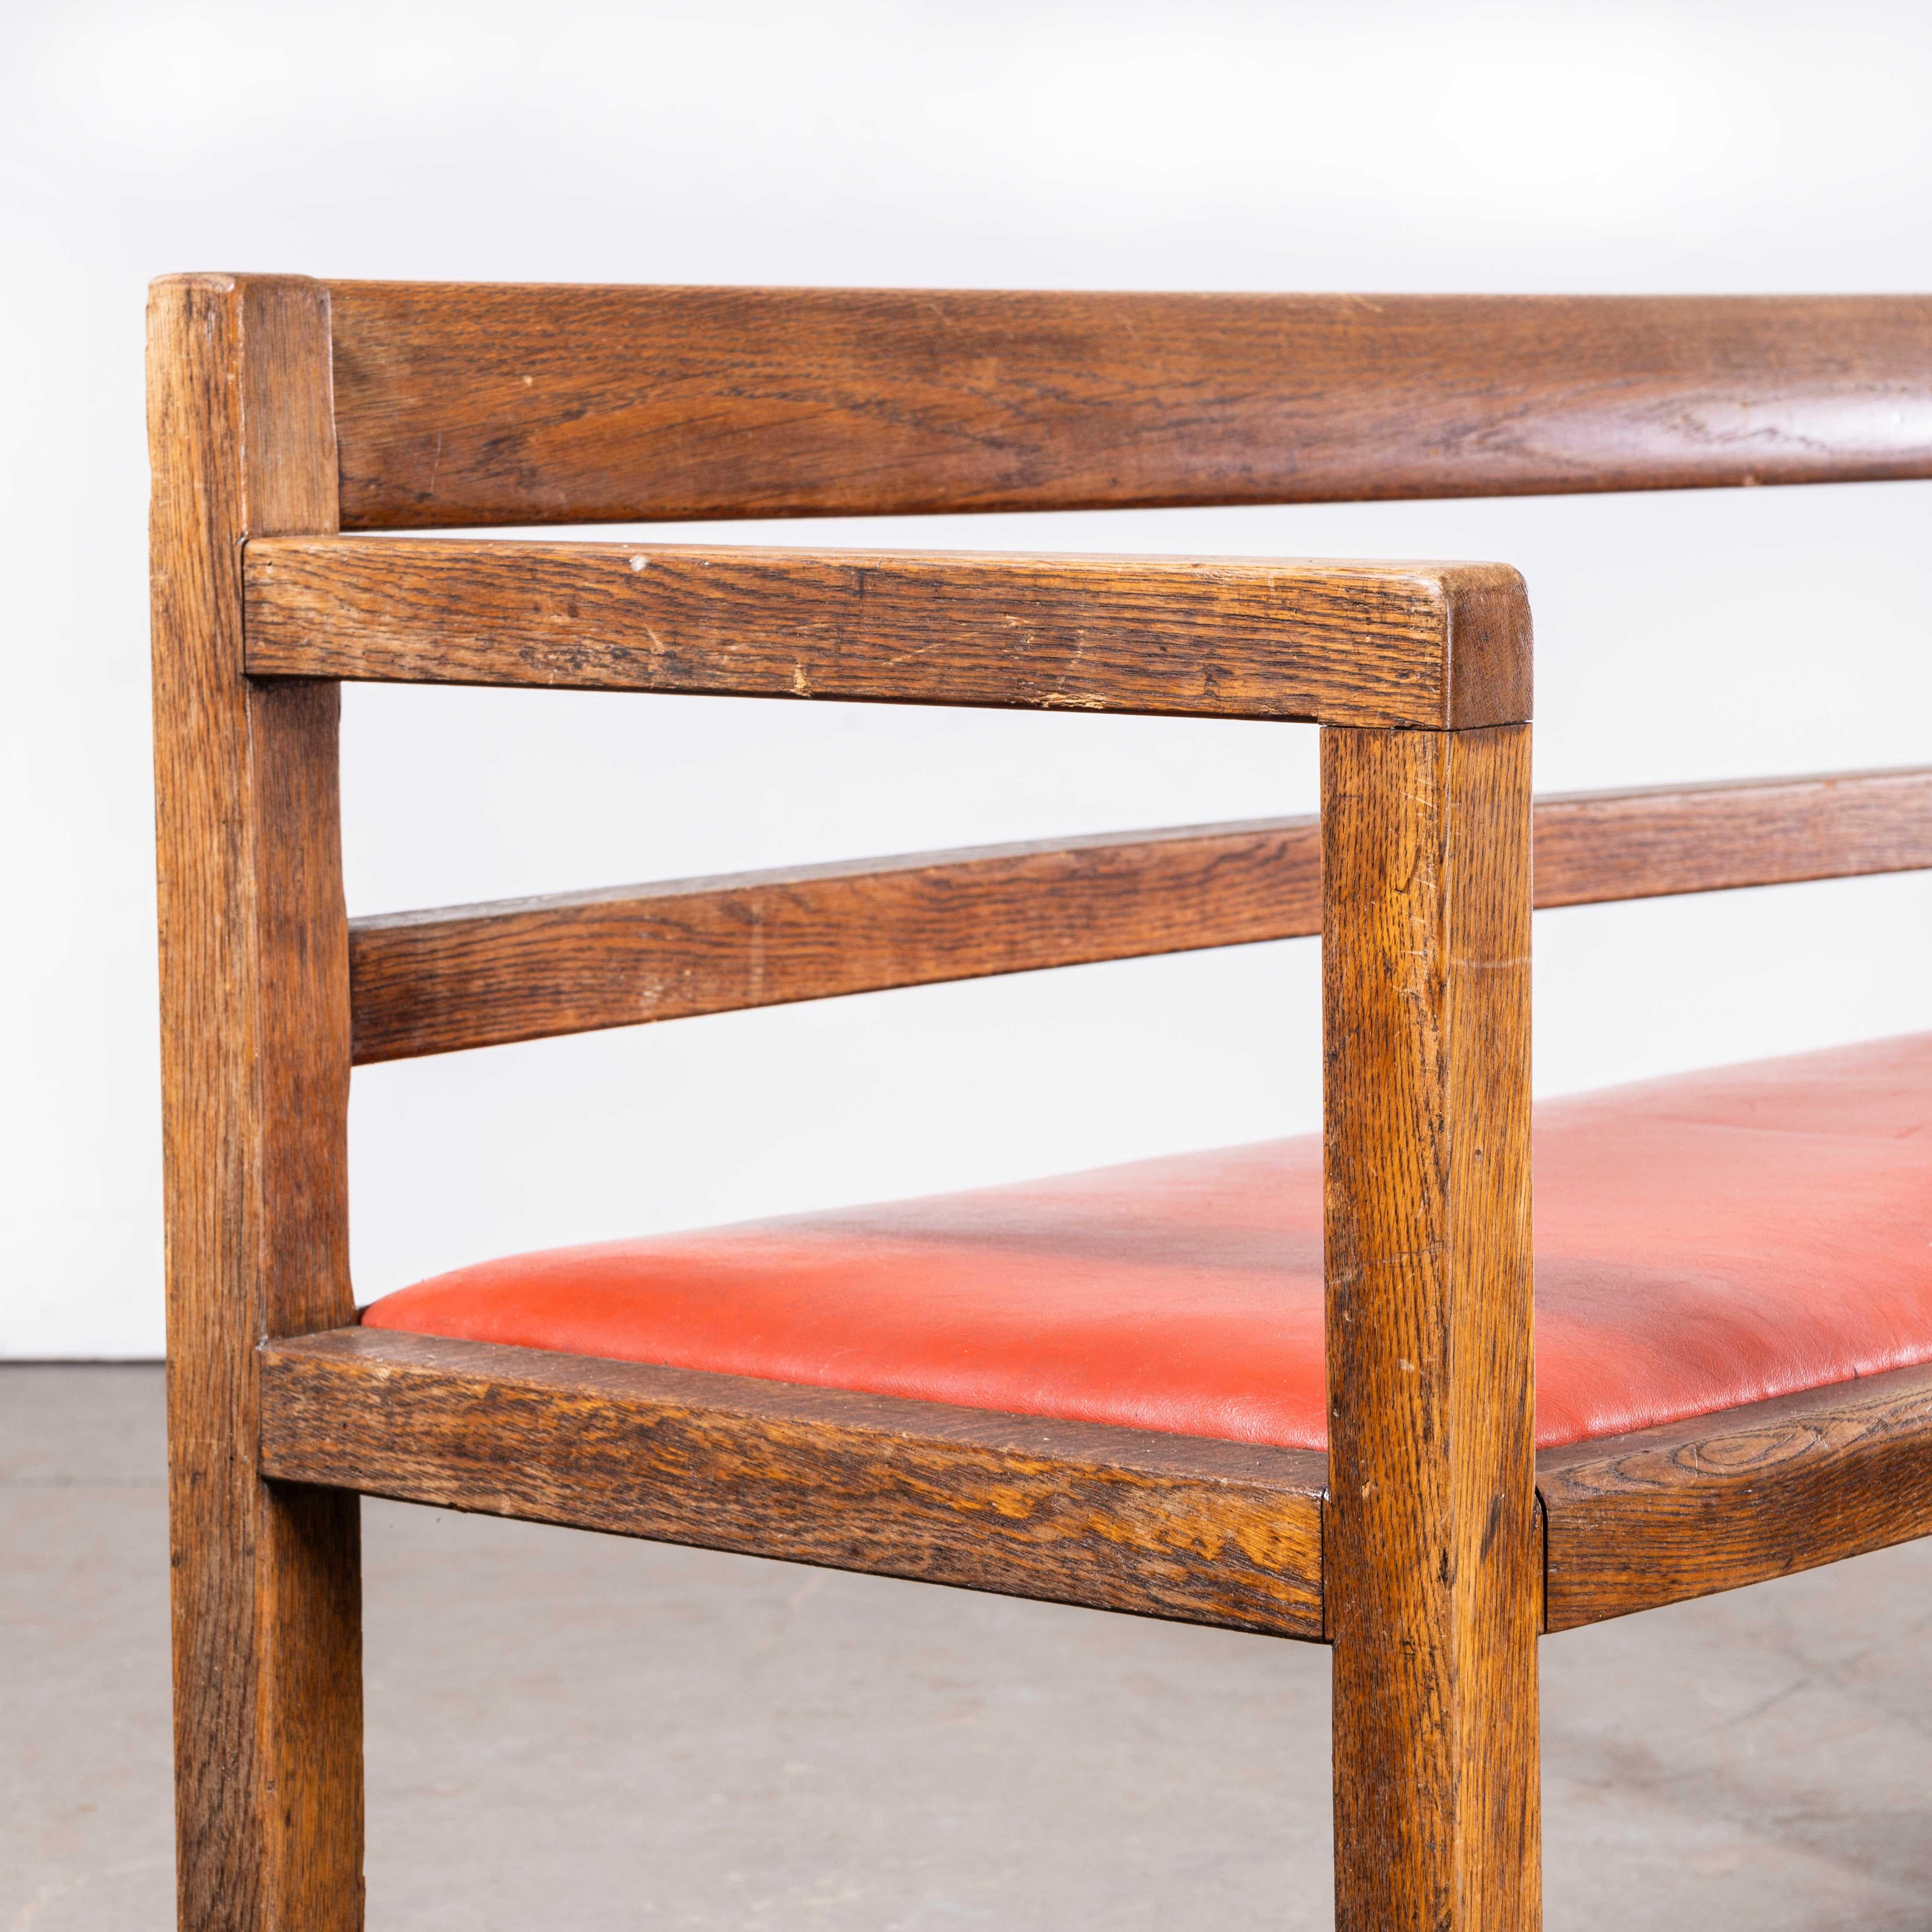 
1950’s Long Upholstered Red Bench – Richardson & Sons
1950’s Long Upholstered Red Bench – Richardson & Sons. Good sized handsome bench from the 1950’s with early upholstery. At 2.5 metres the bench is a good practical size and unusual to have a